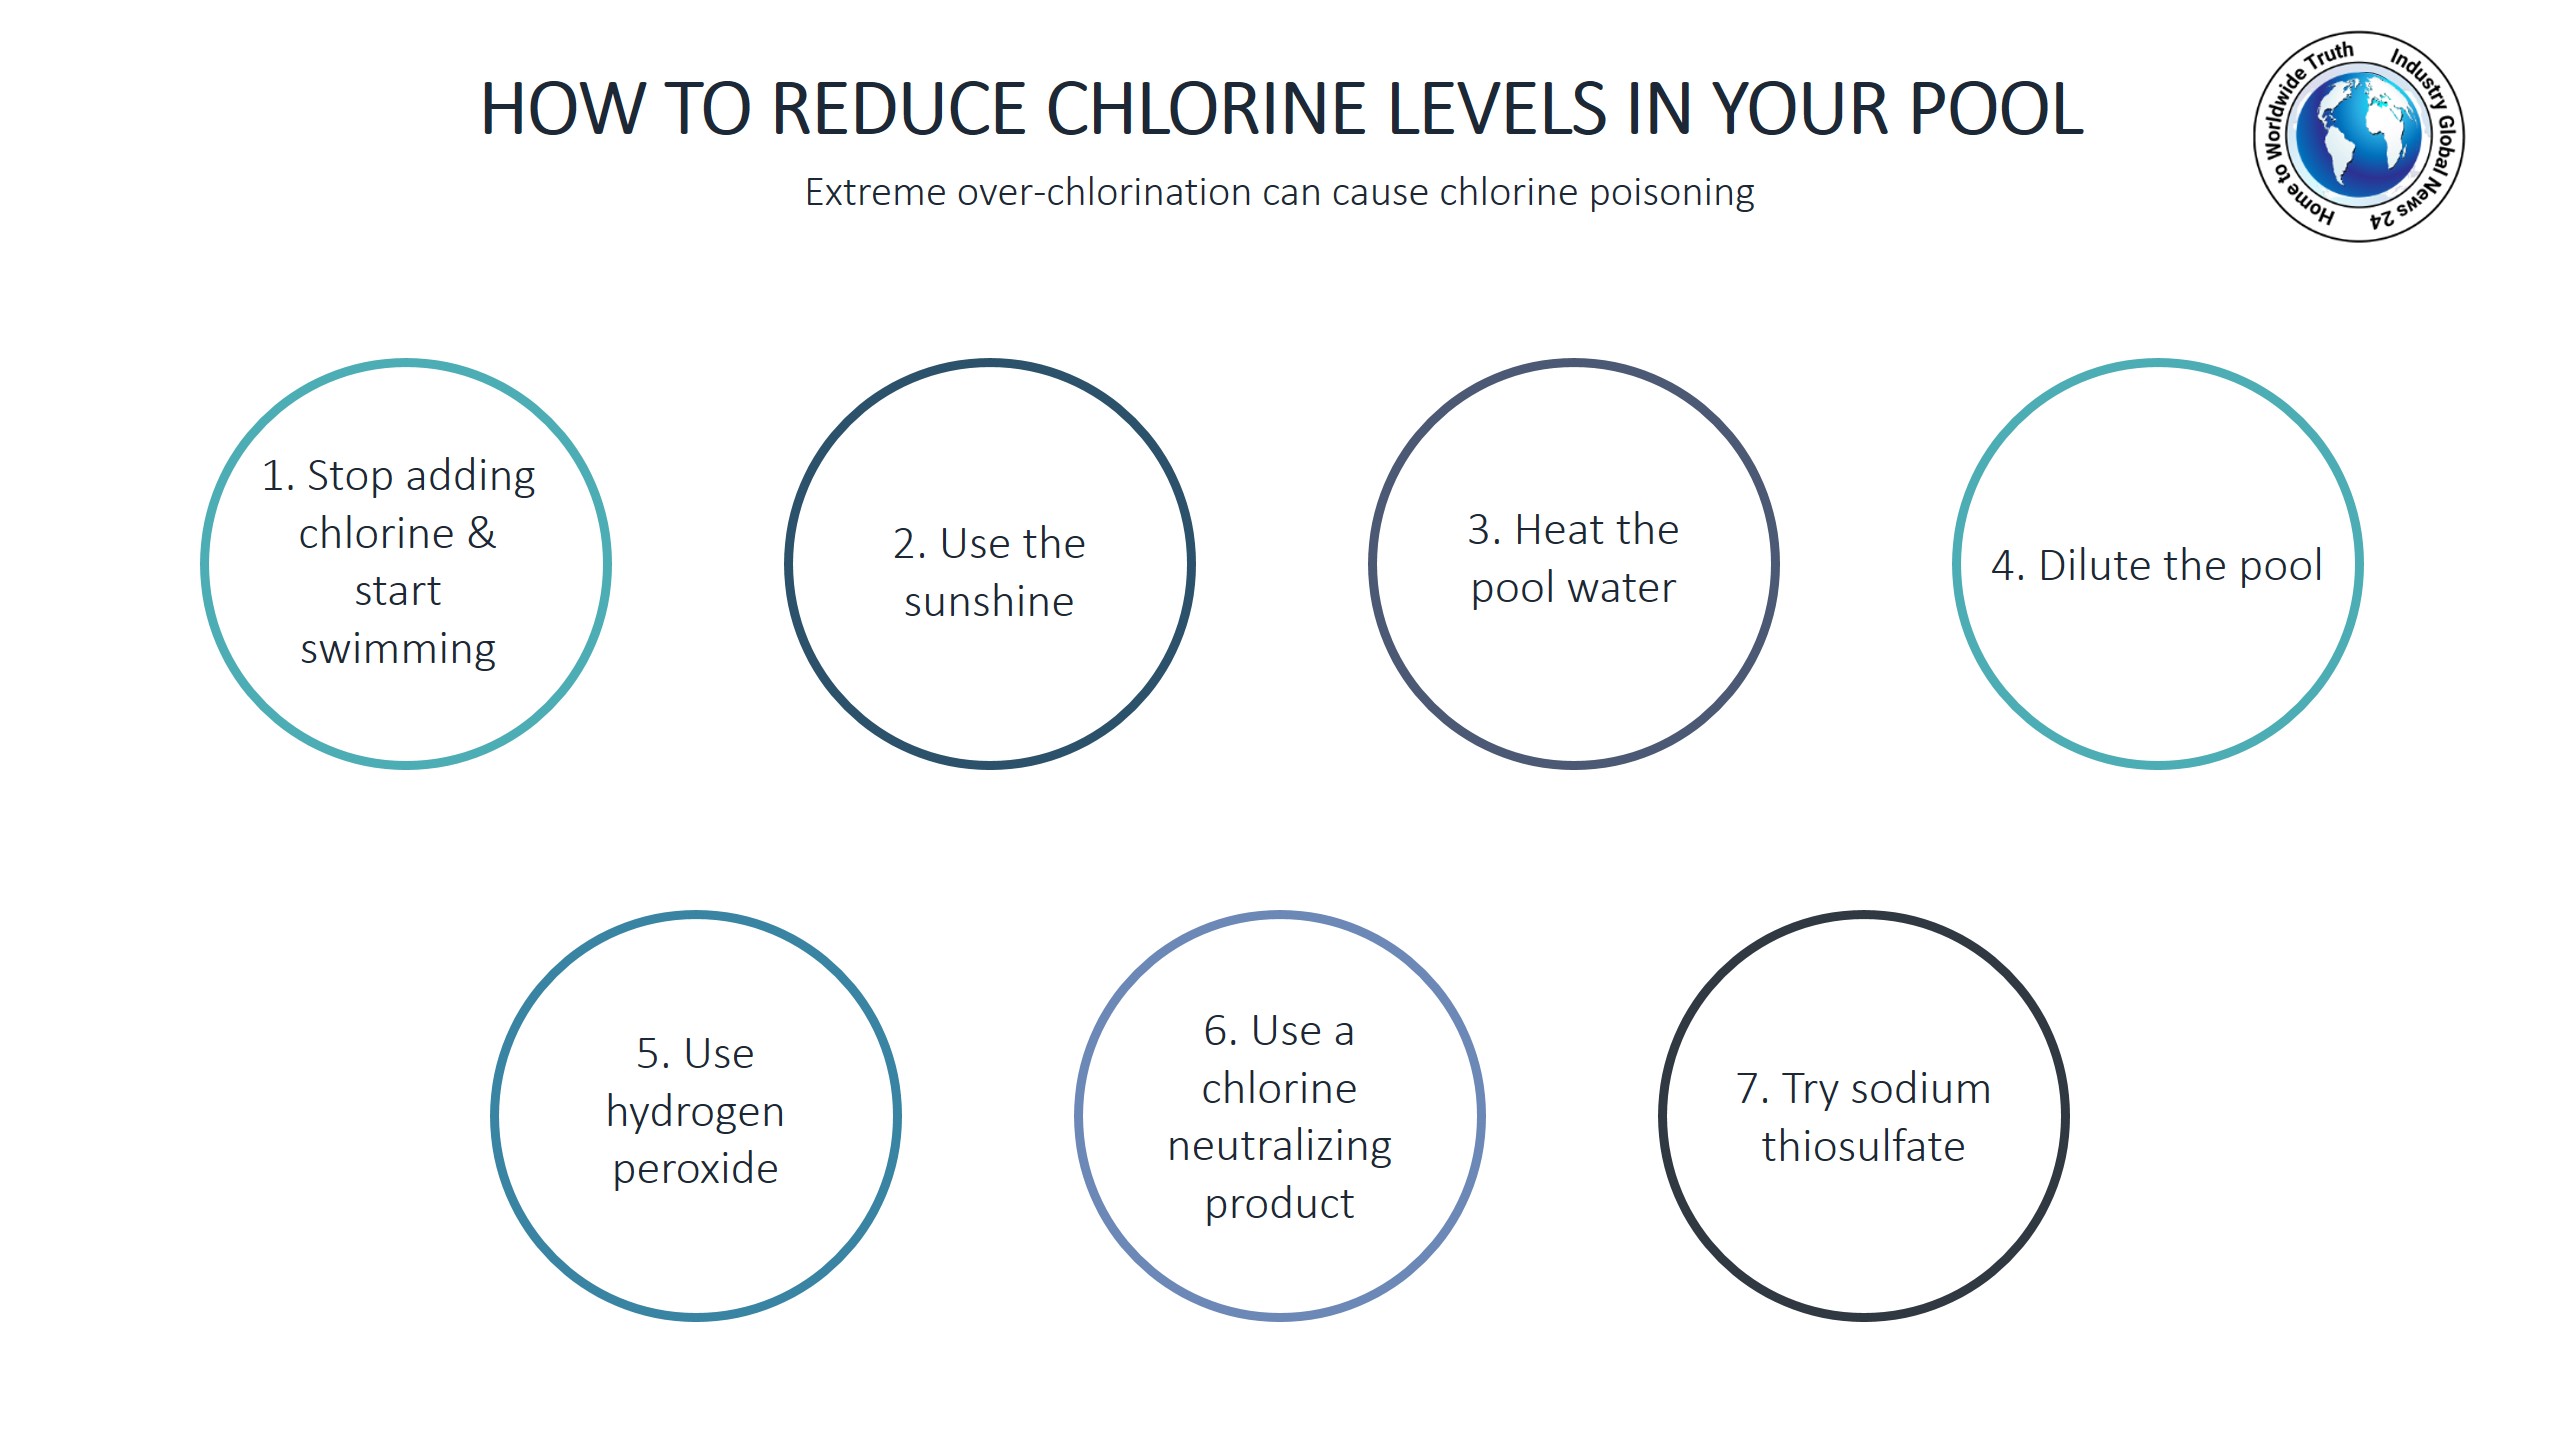 How to reduce chlorine levels in your pool